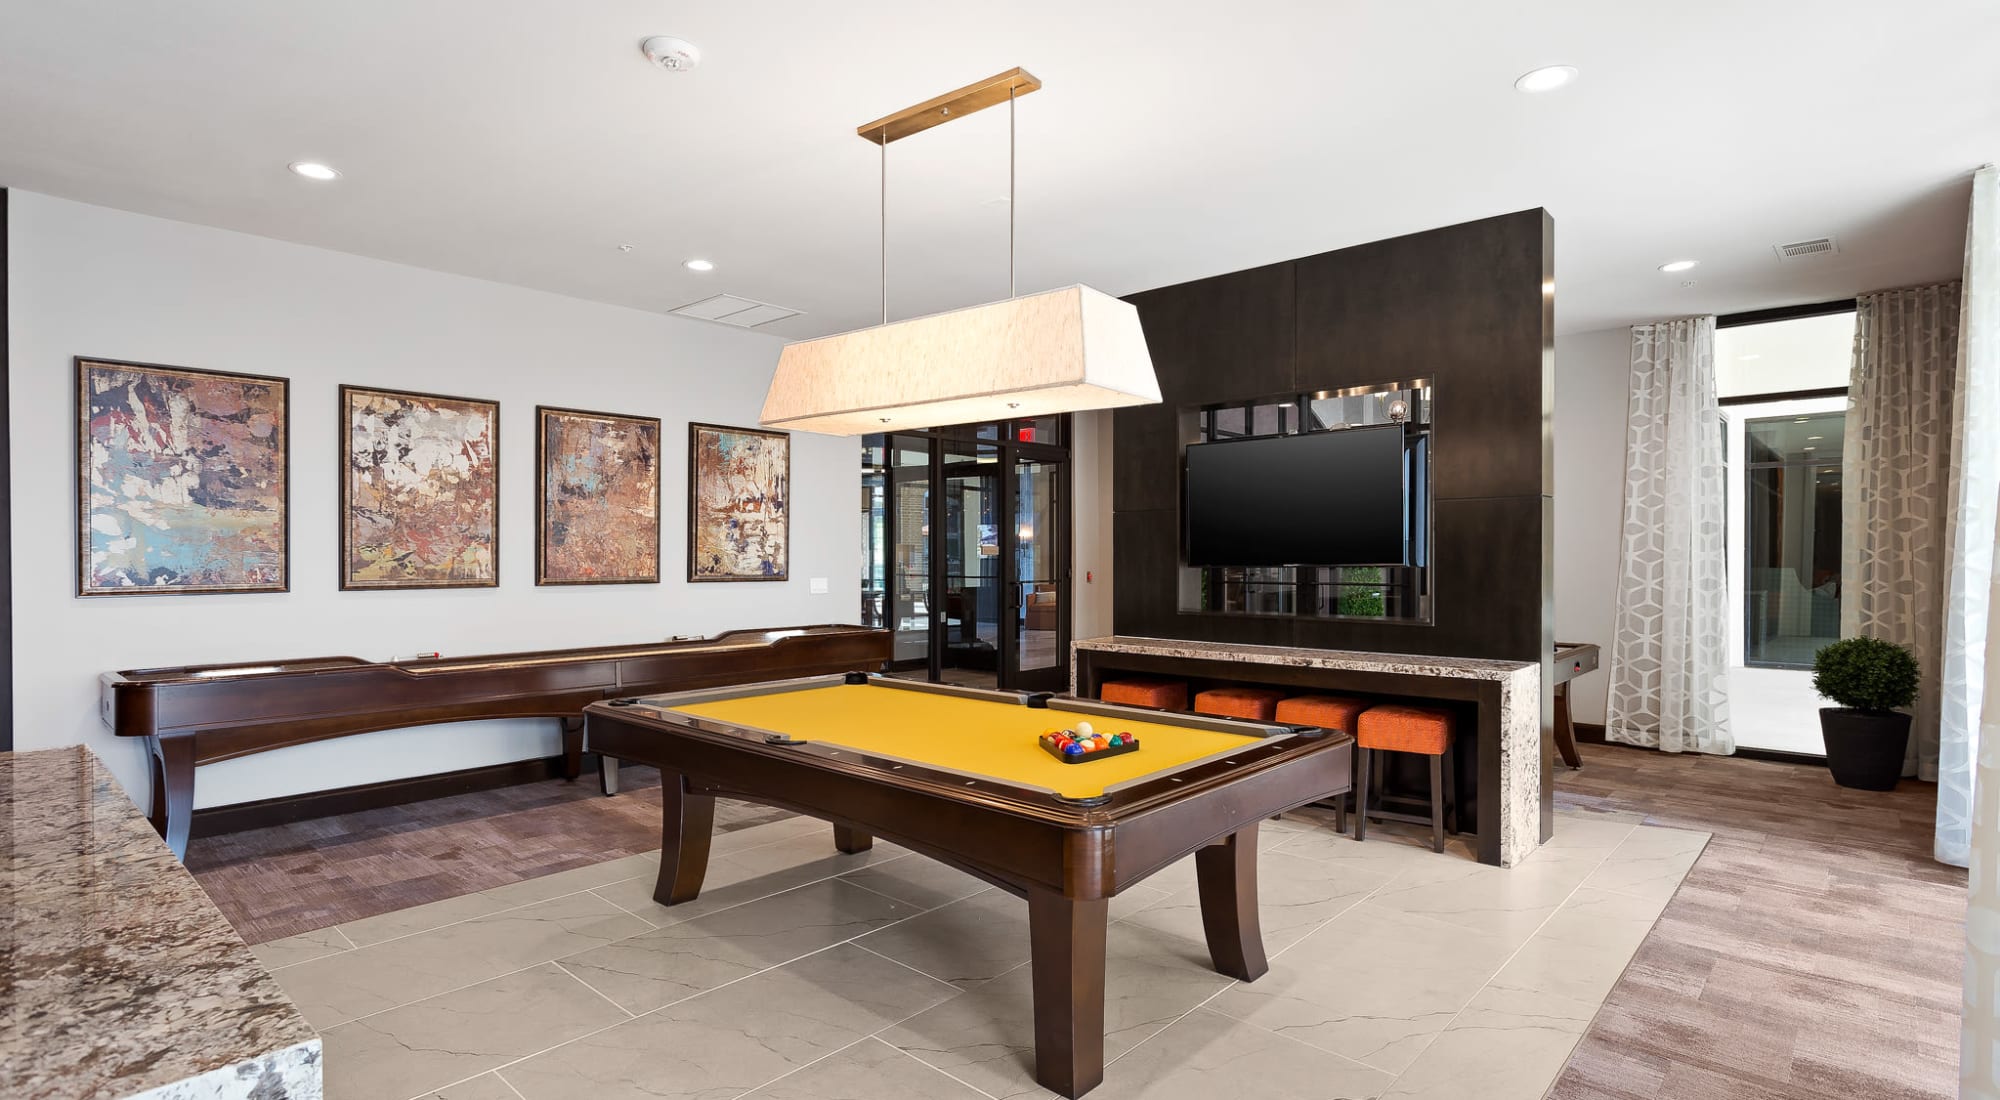 Game Room with Pool Table at Villas at the Rim